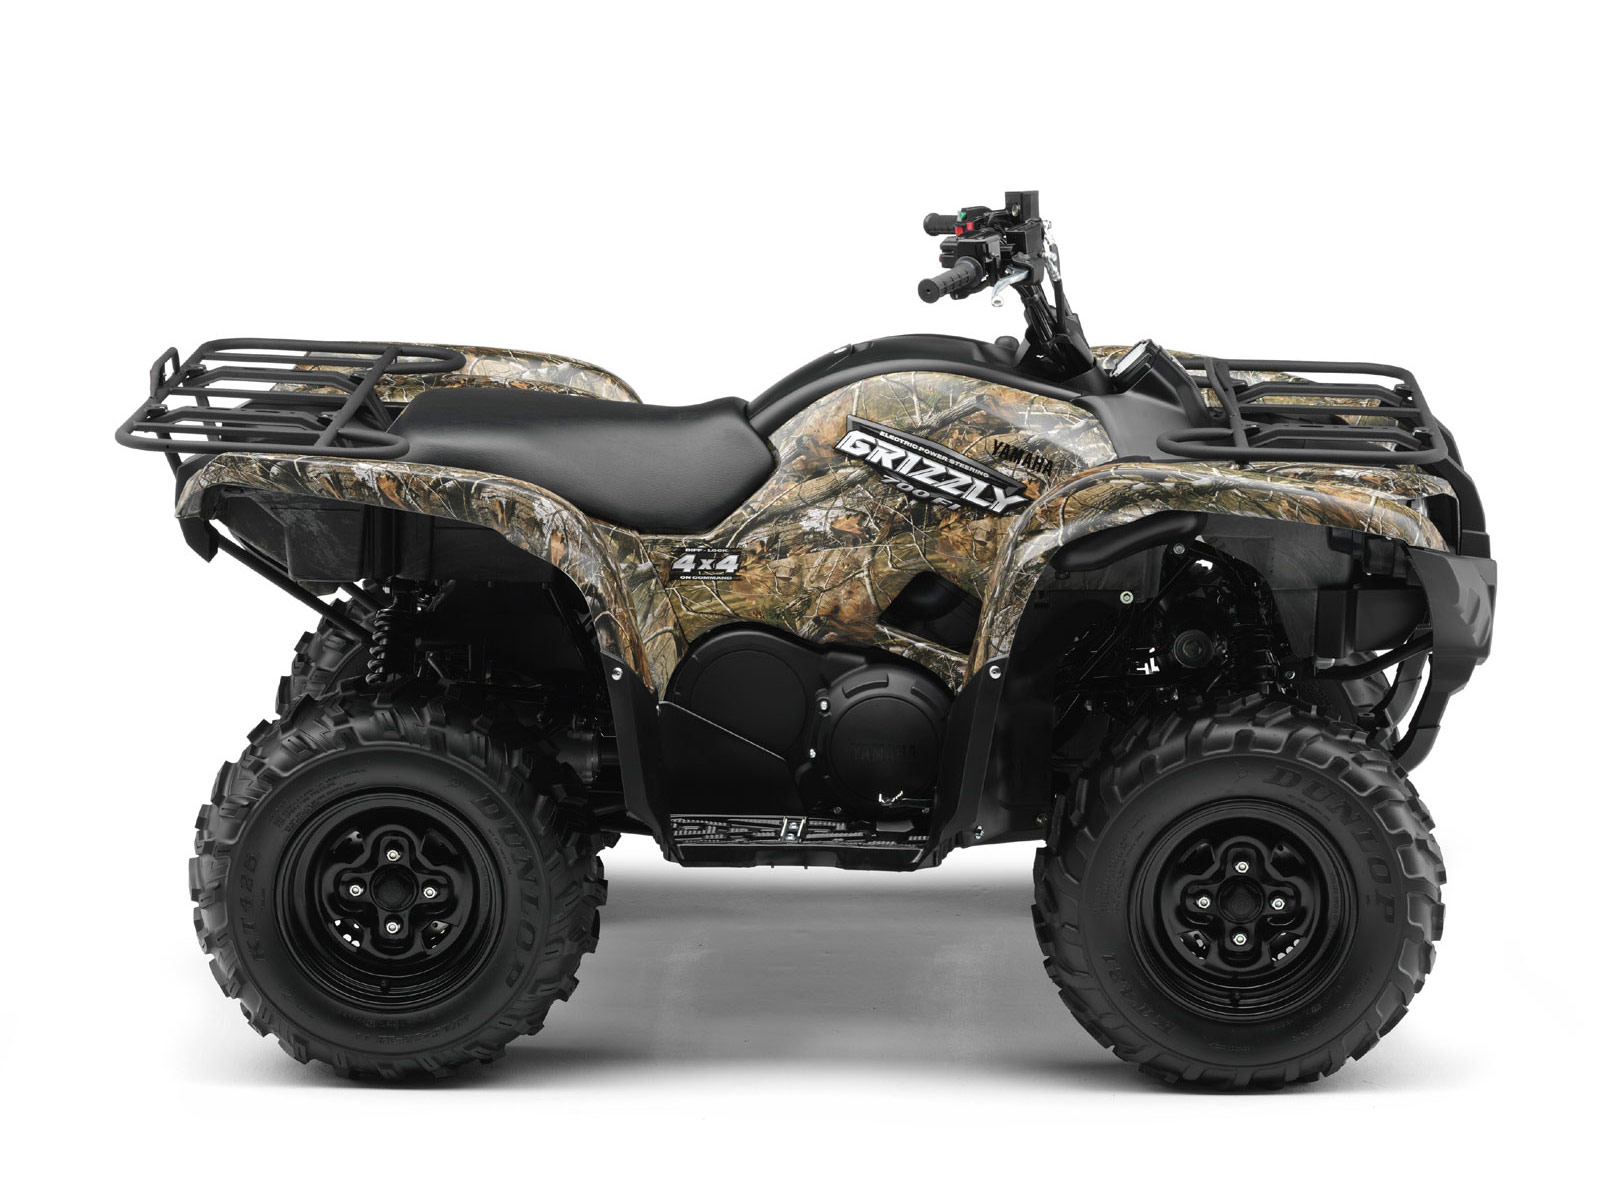 Yamaha Grizzly 700 Grizzly 700 photo - 6